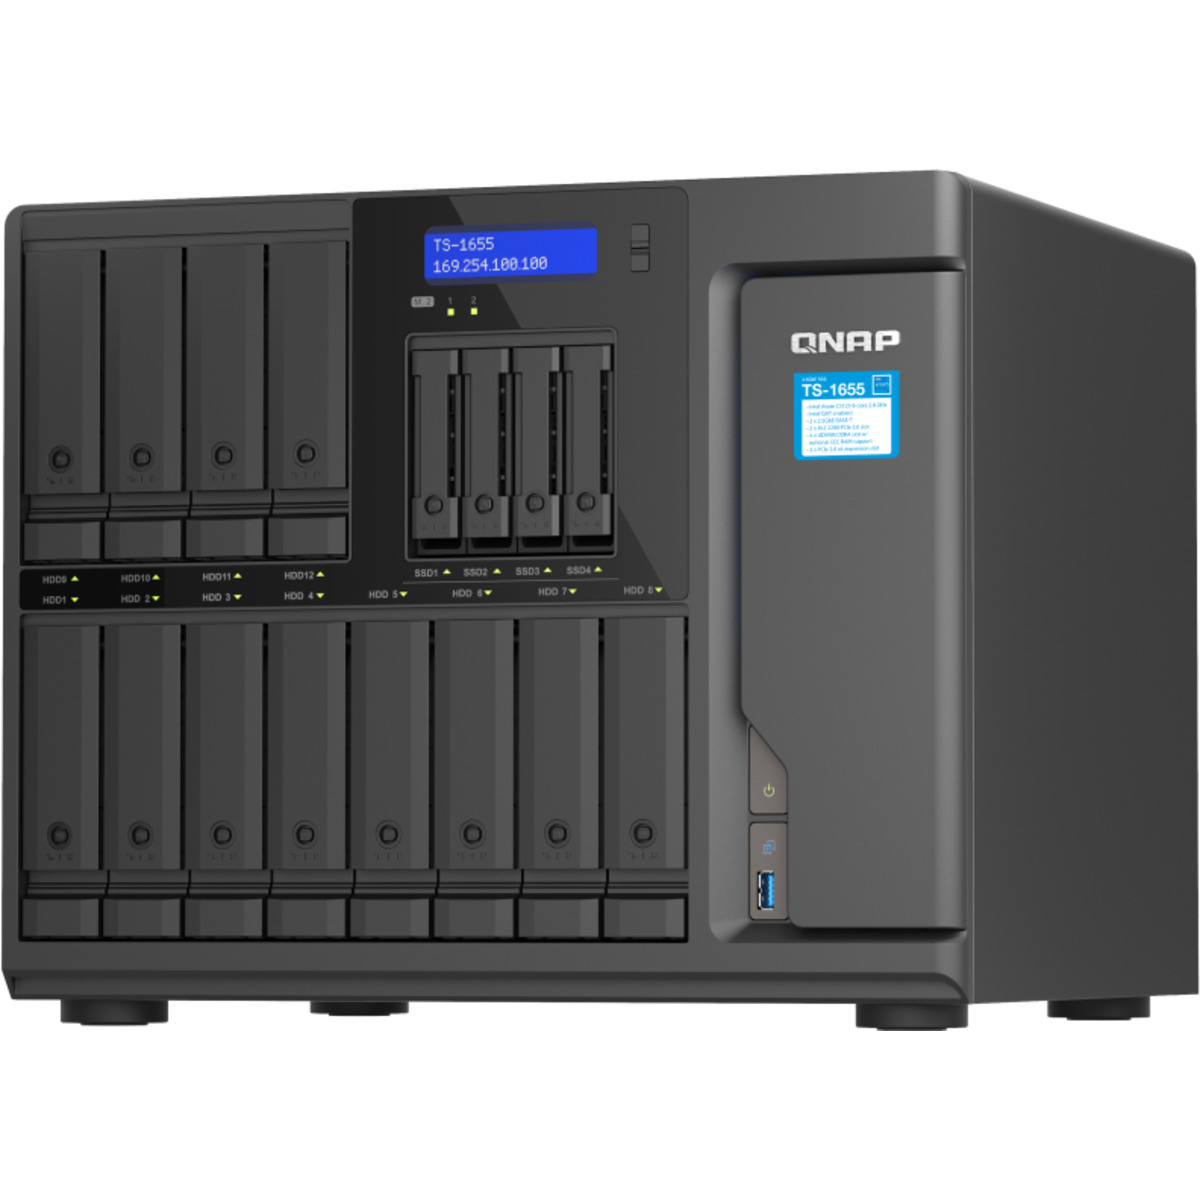 buy $5664 QNAP TS-1655 144tb Desktop NAS - Network Attached Storage Device 12x12000gb Seagate IronWolf Pro ST12000NT001 3.5 7200rpm SATA 6Gb/s HDD NAS Class Drives Installed - Burn-In Tested - FREE RAM UPGRADE - nas headquarters buy network attached storage server device das new raid-5 free shipping simply usa TS-1655